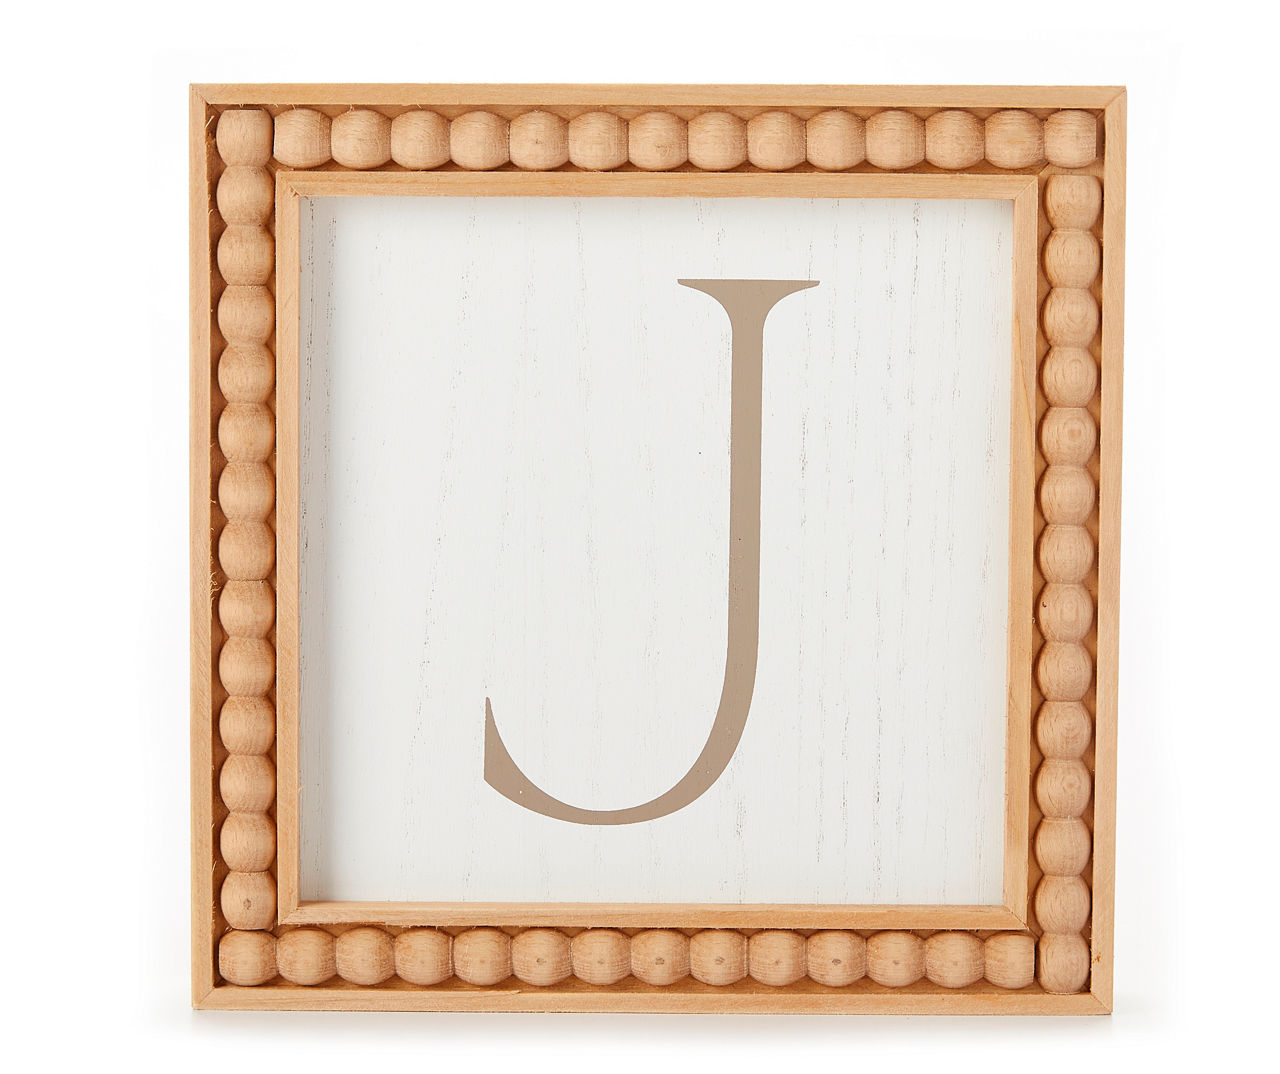 "J" Brown & White Wood Bead Framed Wall Plaque 